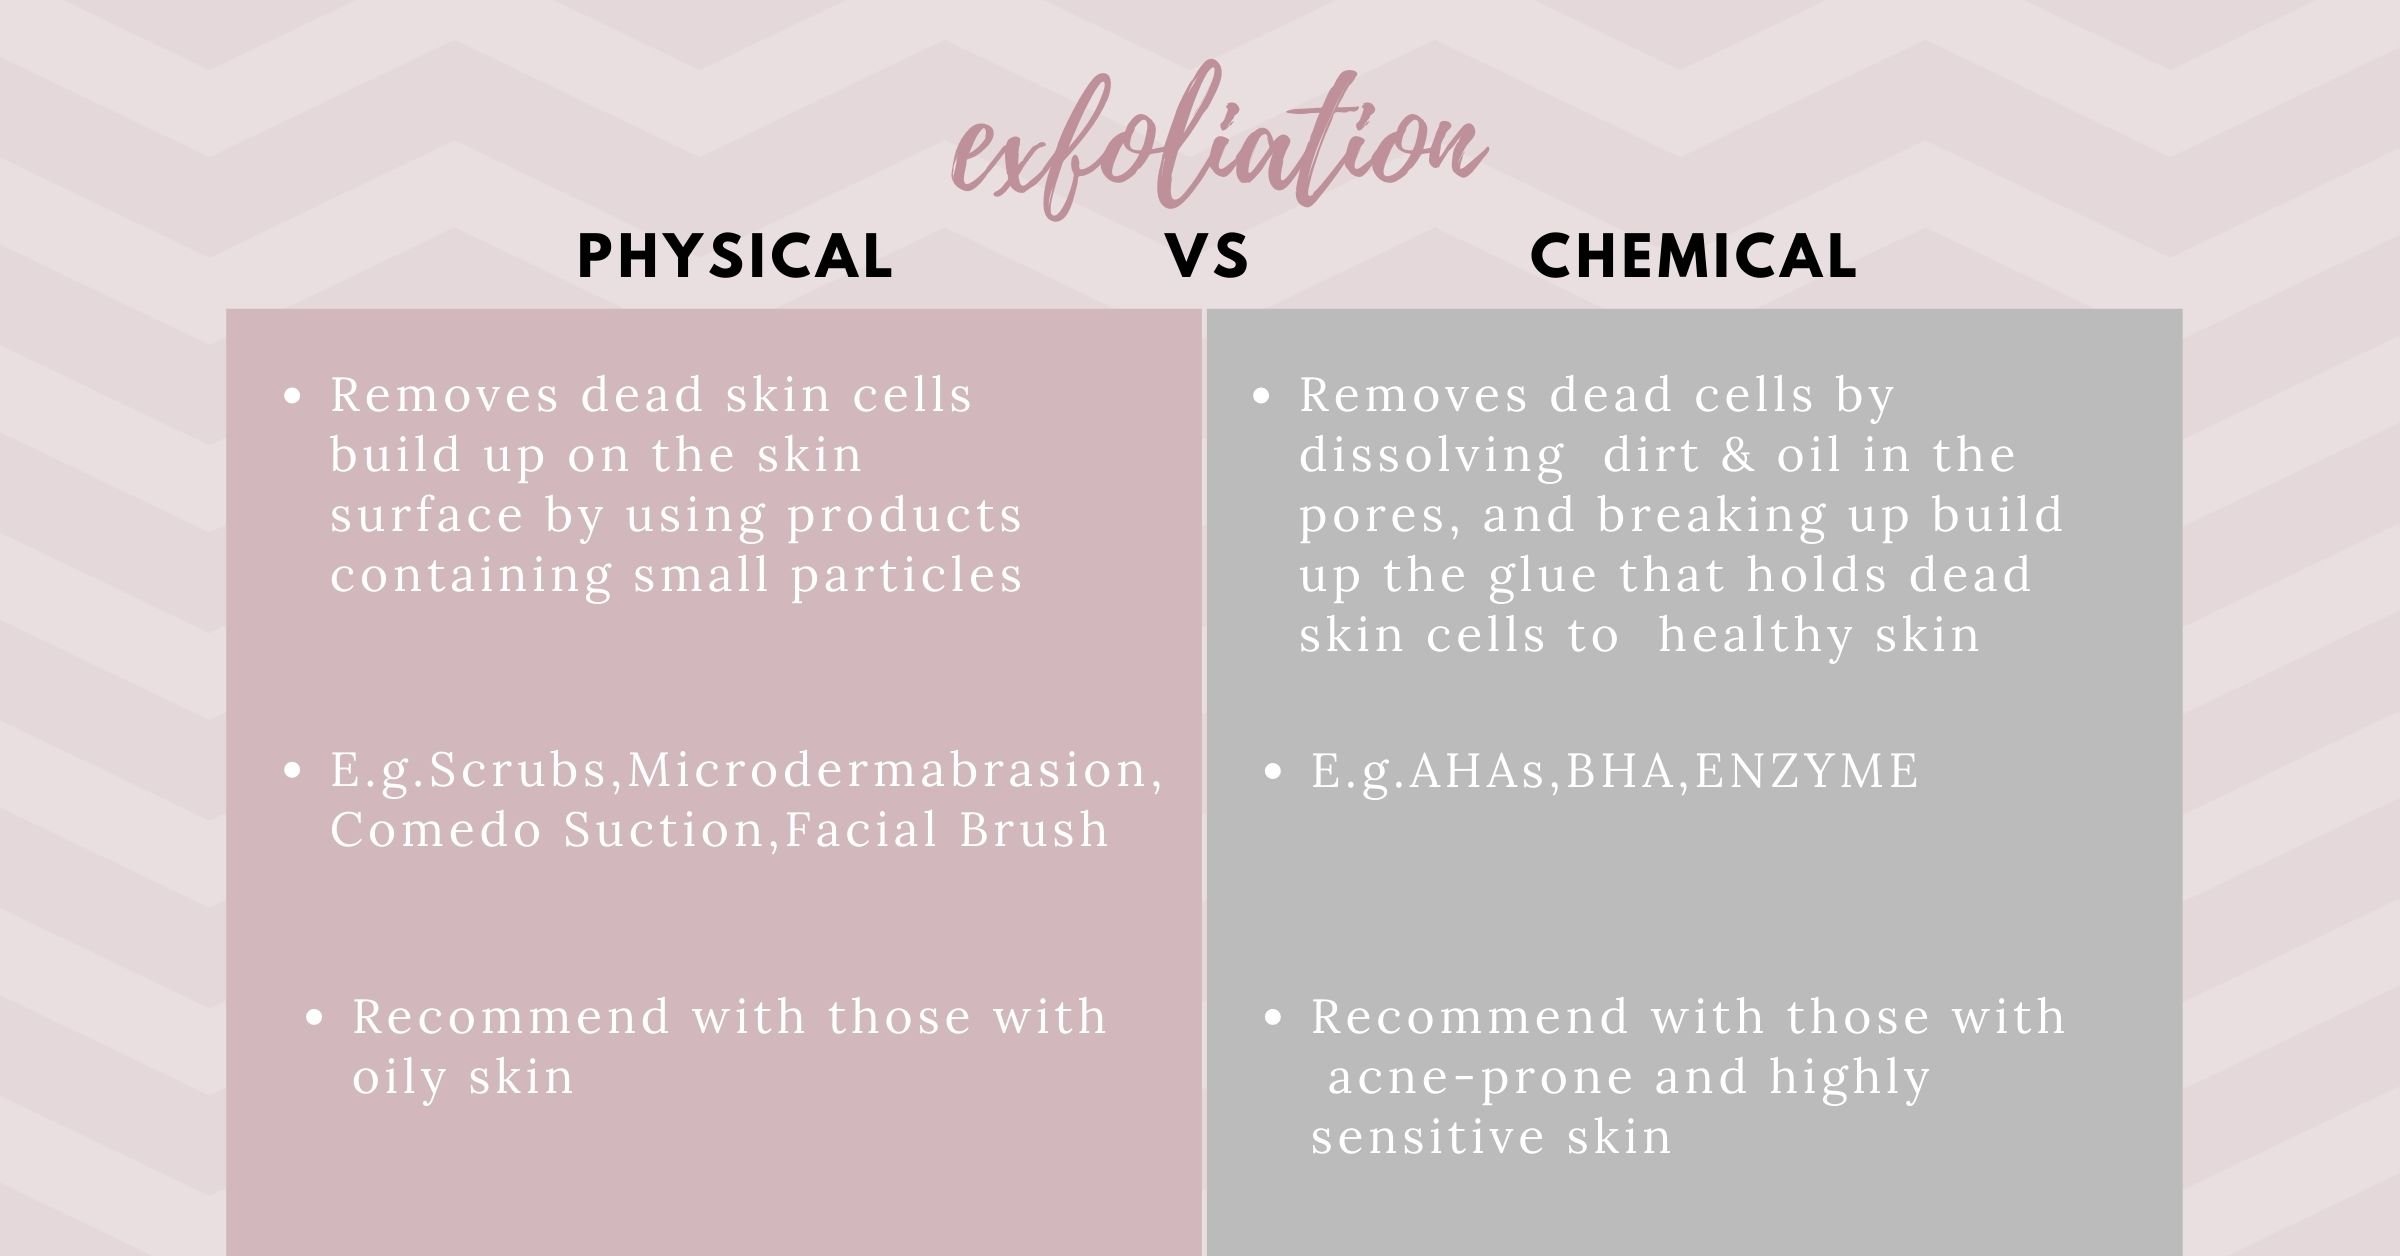 What is the Difference Between Exfoliation and Chemical Peel? 2